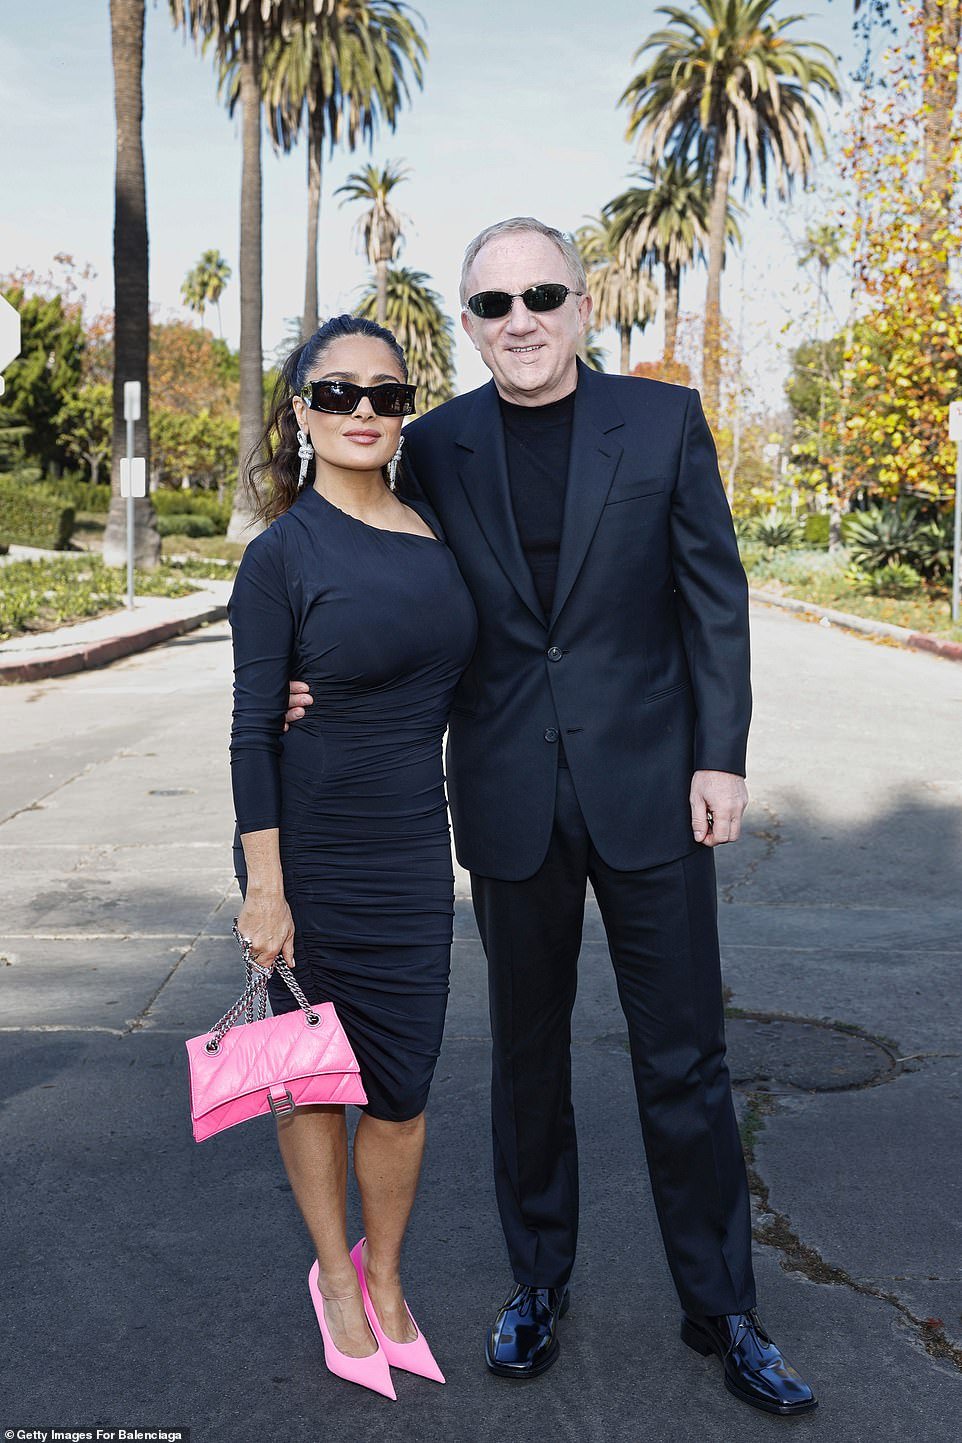 Salma was joined at the event by her French billionaire husband François-Henri Pinault, 61